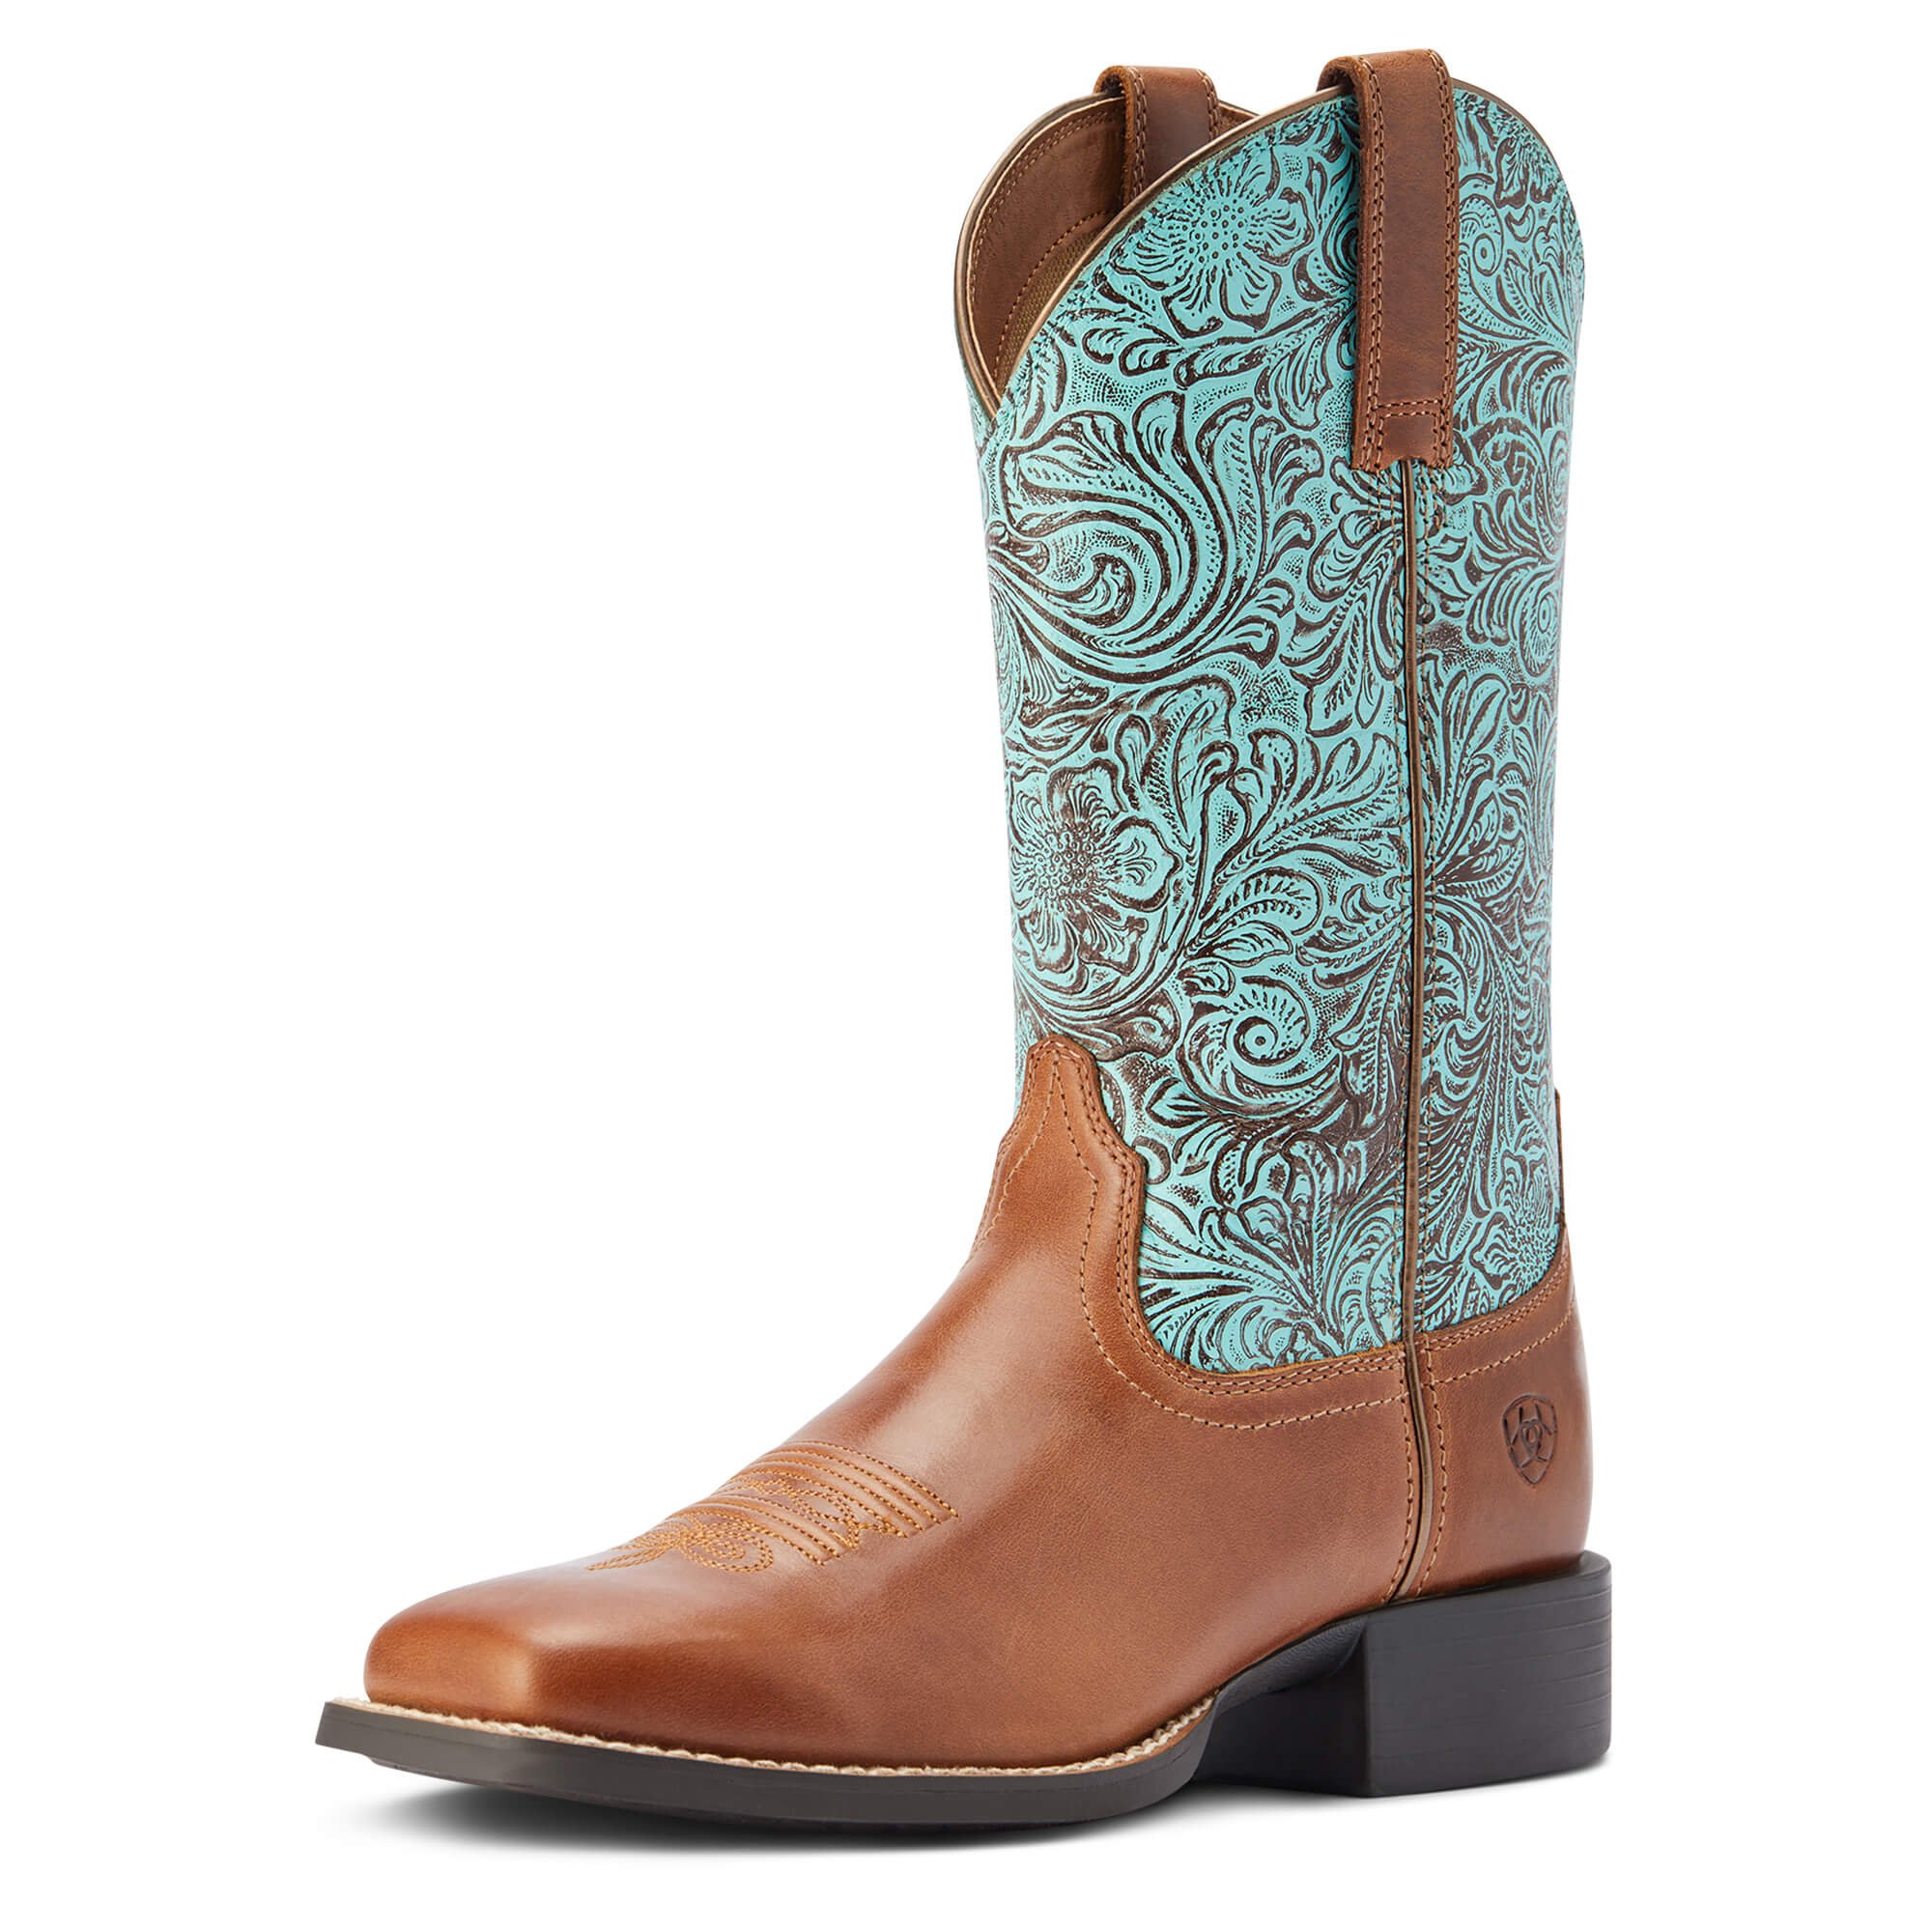 Ariat Round Up Wide Square Dame Western stvler